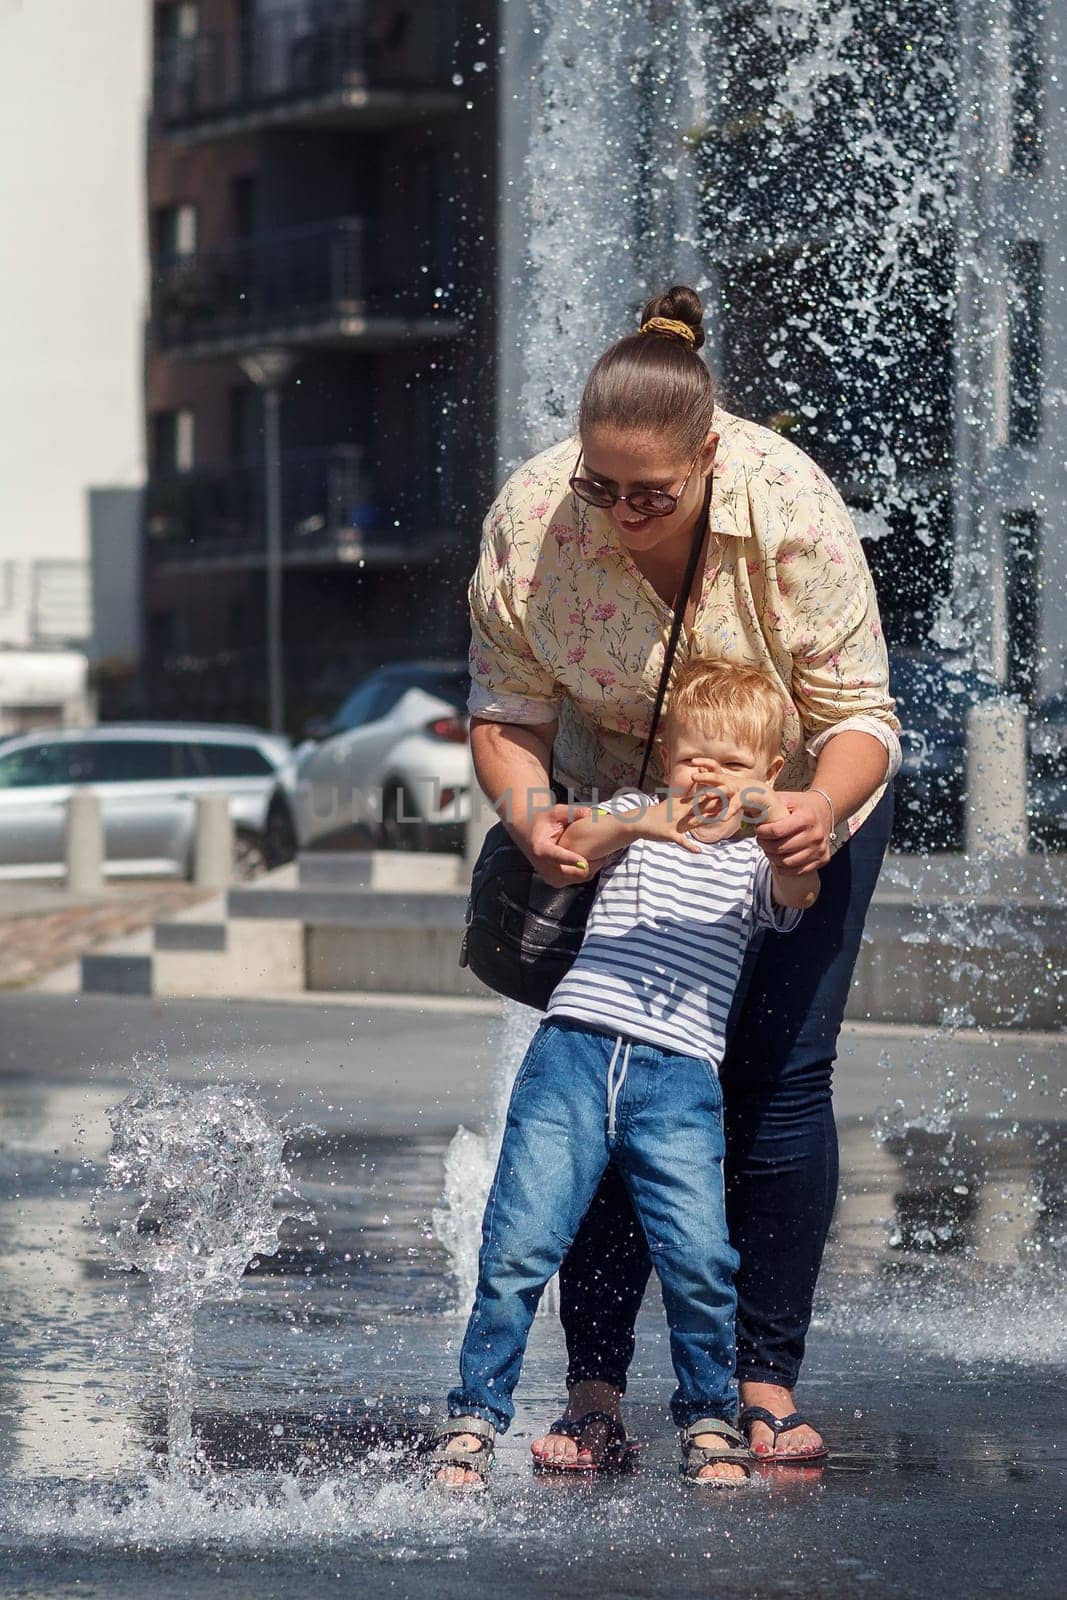 Mom with her son in the city by the water fountain. The little child is frightened by the sudden jets of water. Kids fun in the city on a hot summer day.